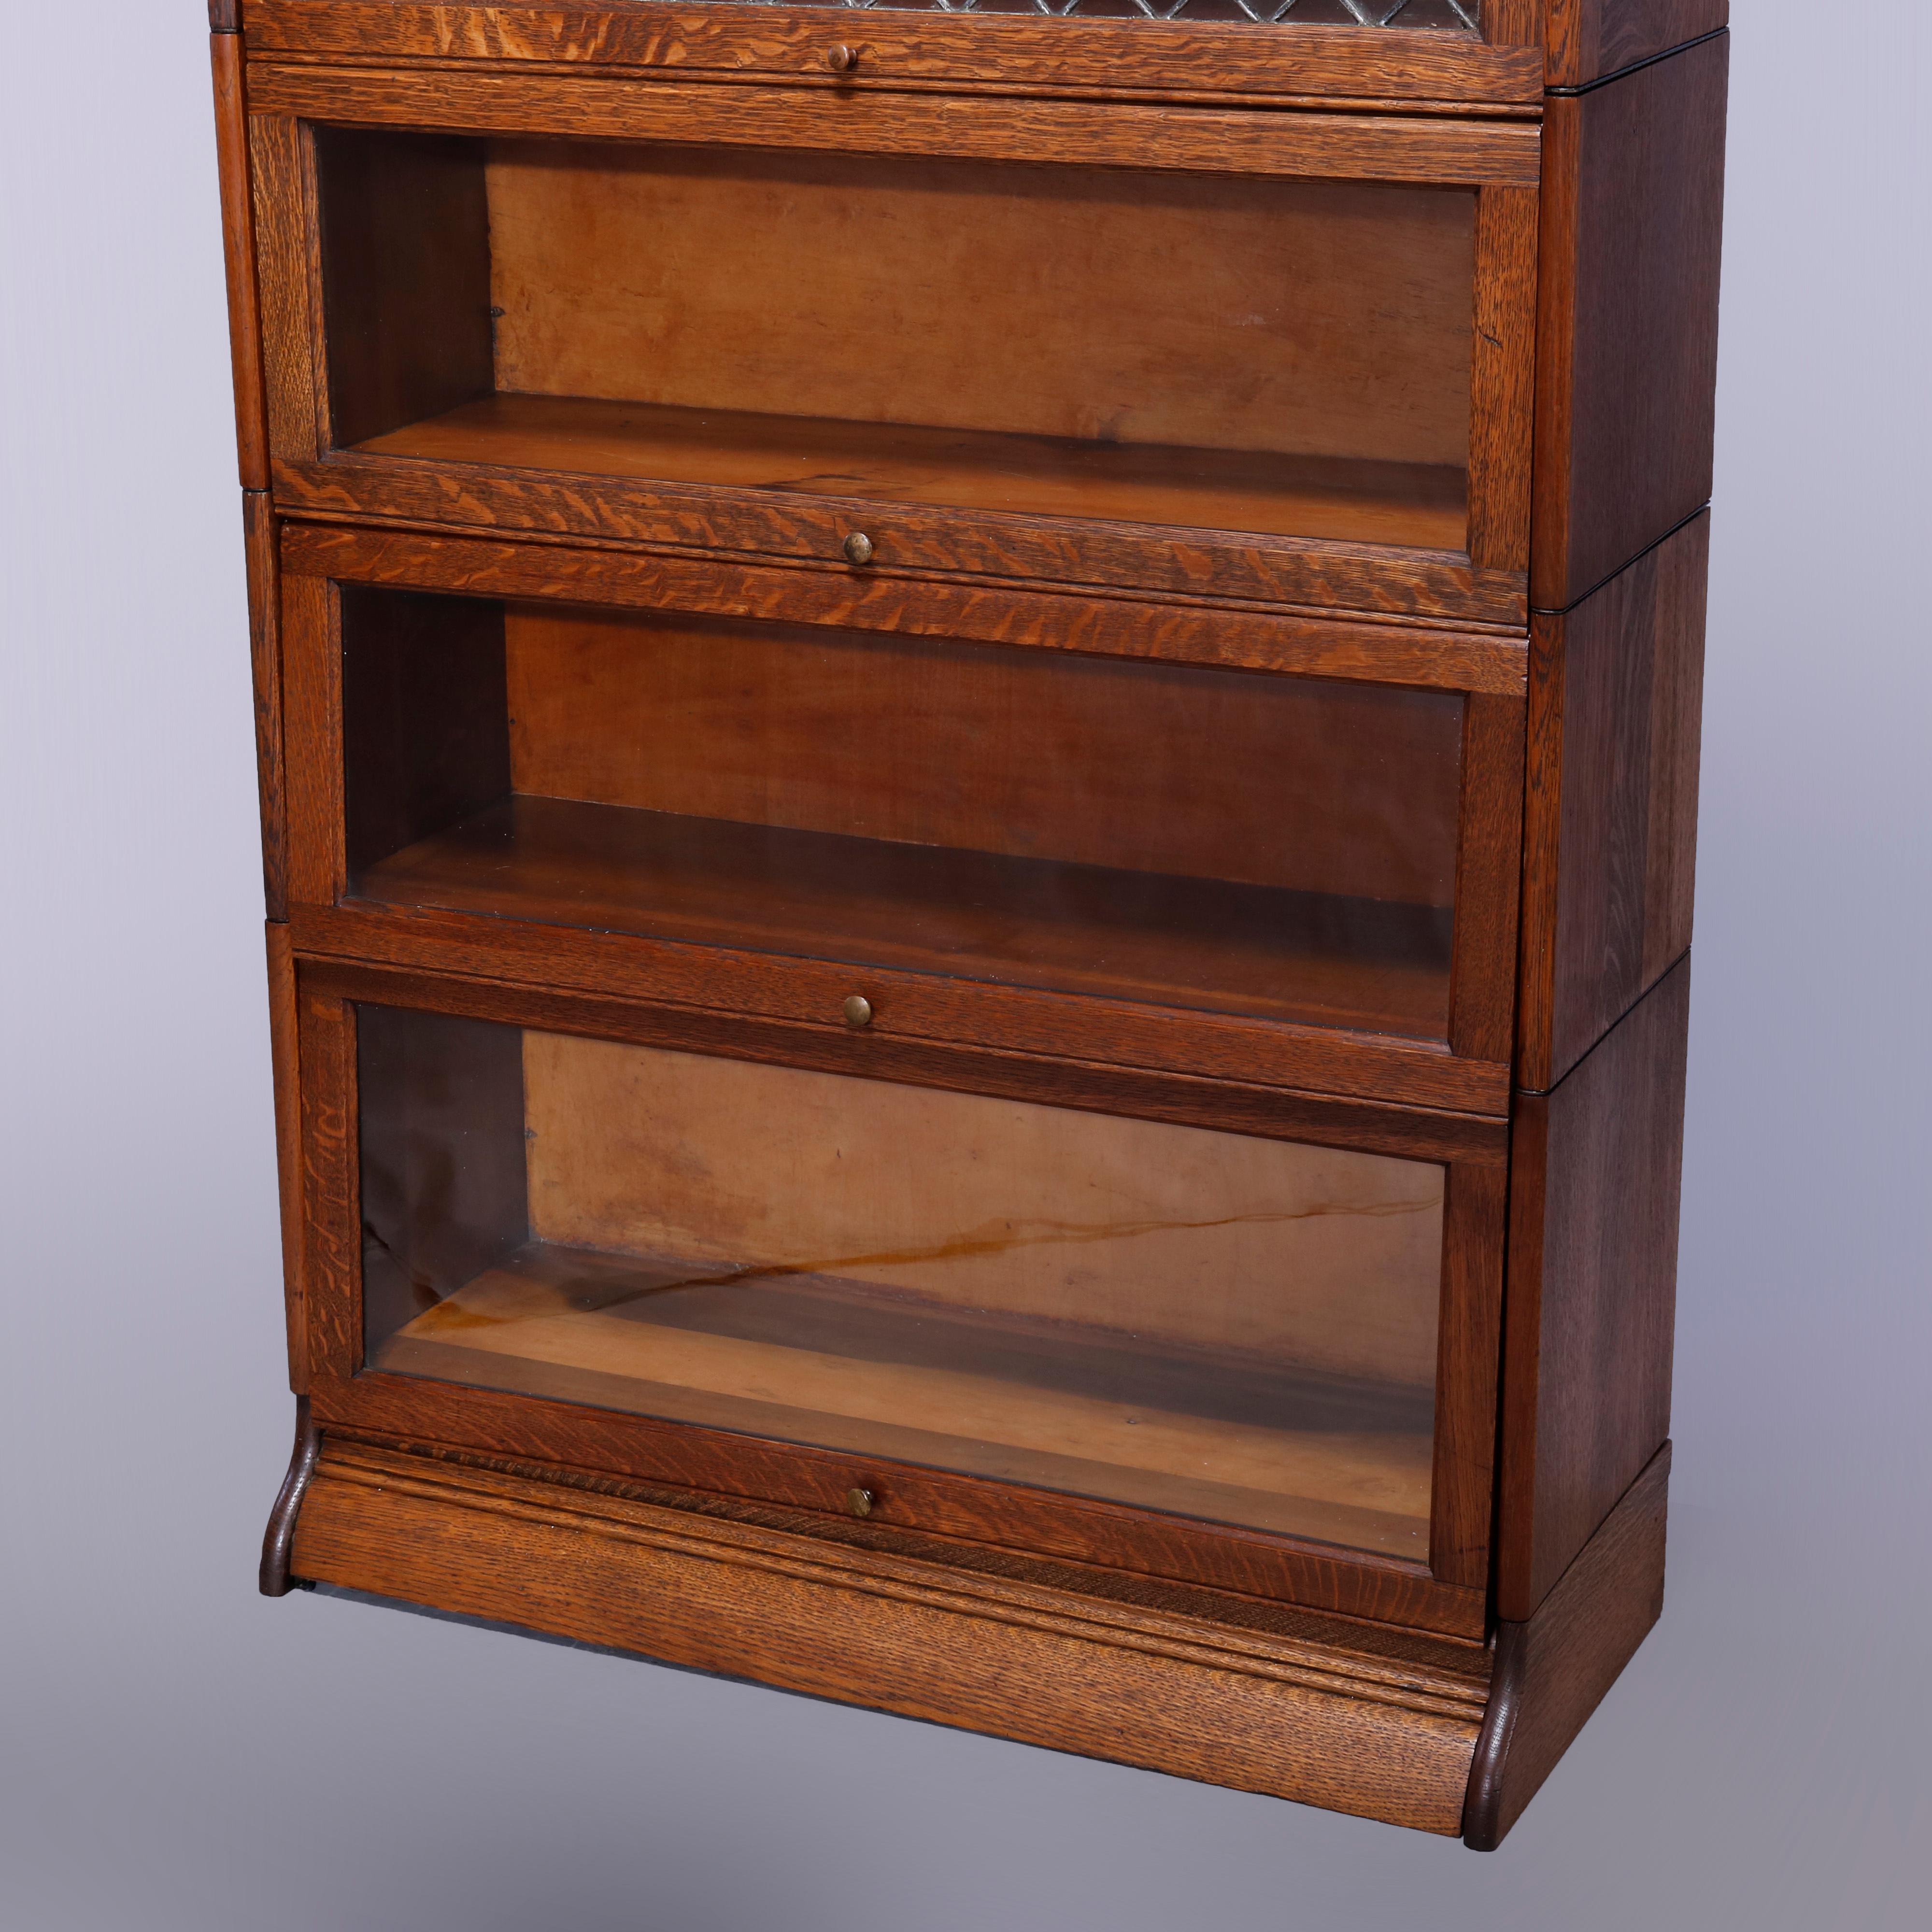 antique barrister bookcase with glass doors